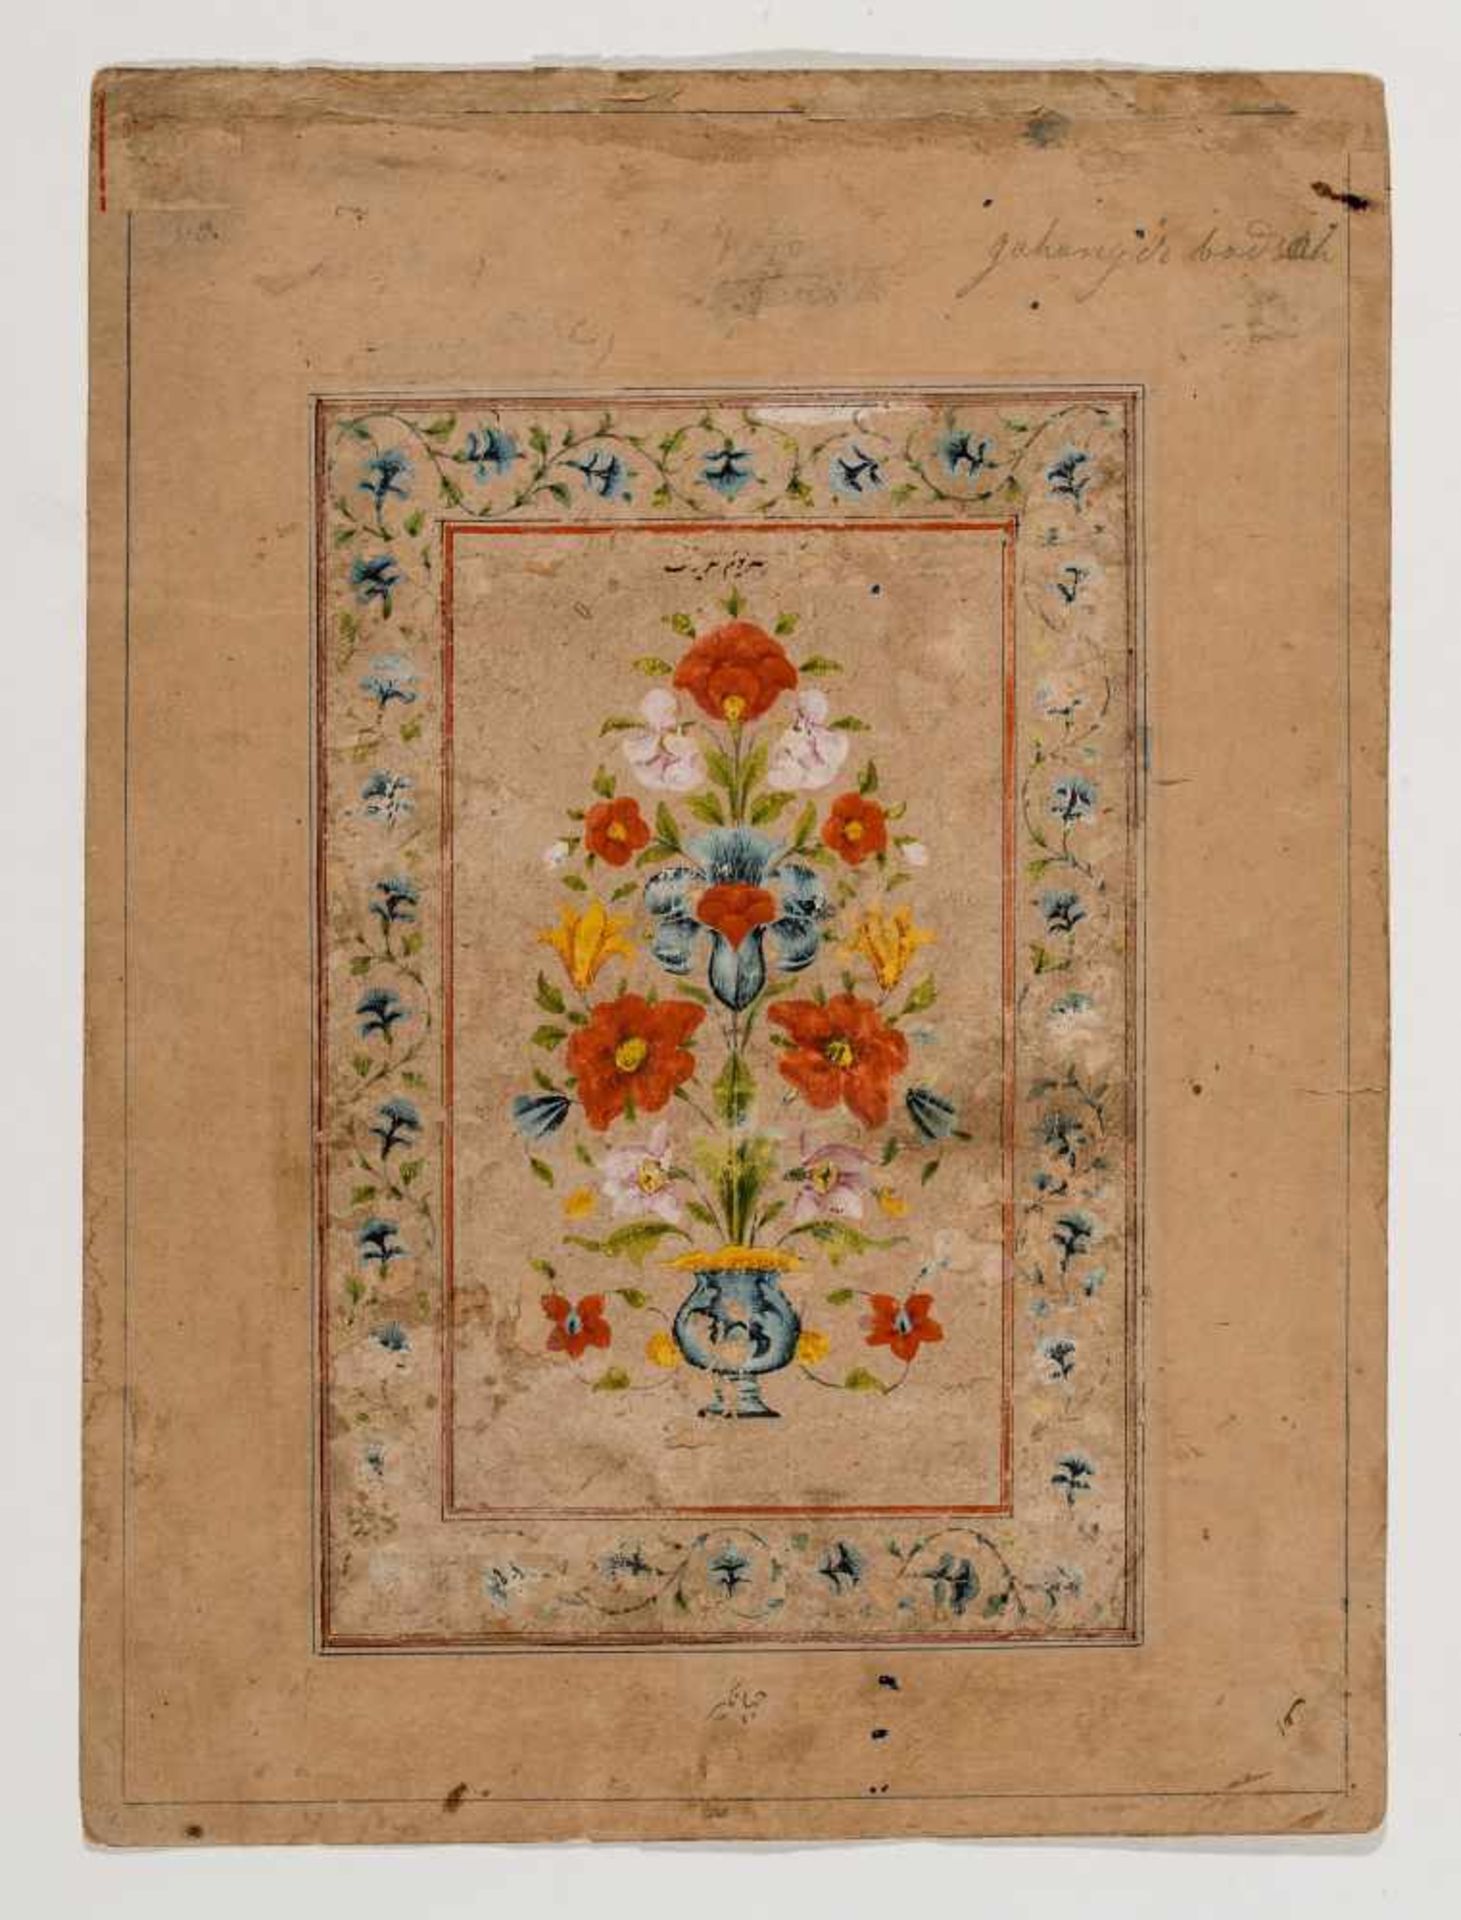 AN INDO-MUGHAL PAGE - INDIA, 18TH CENTURYPainting with colors on paperIndia, 18th centuryDepicting a